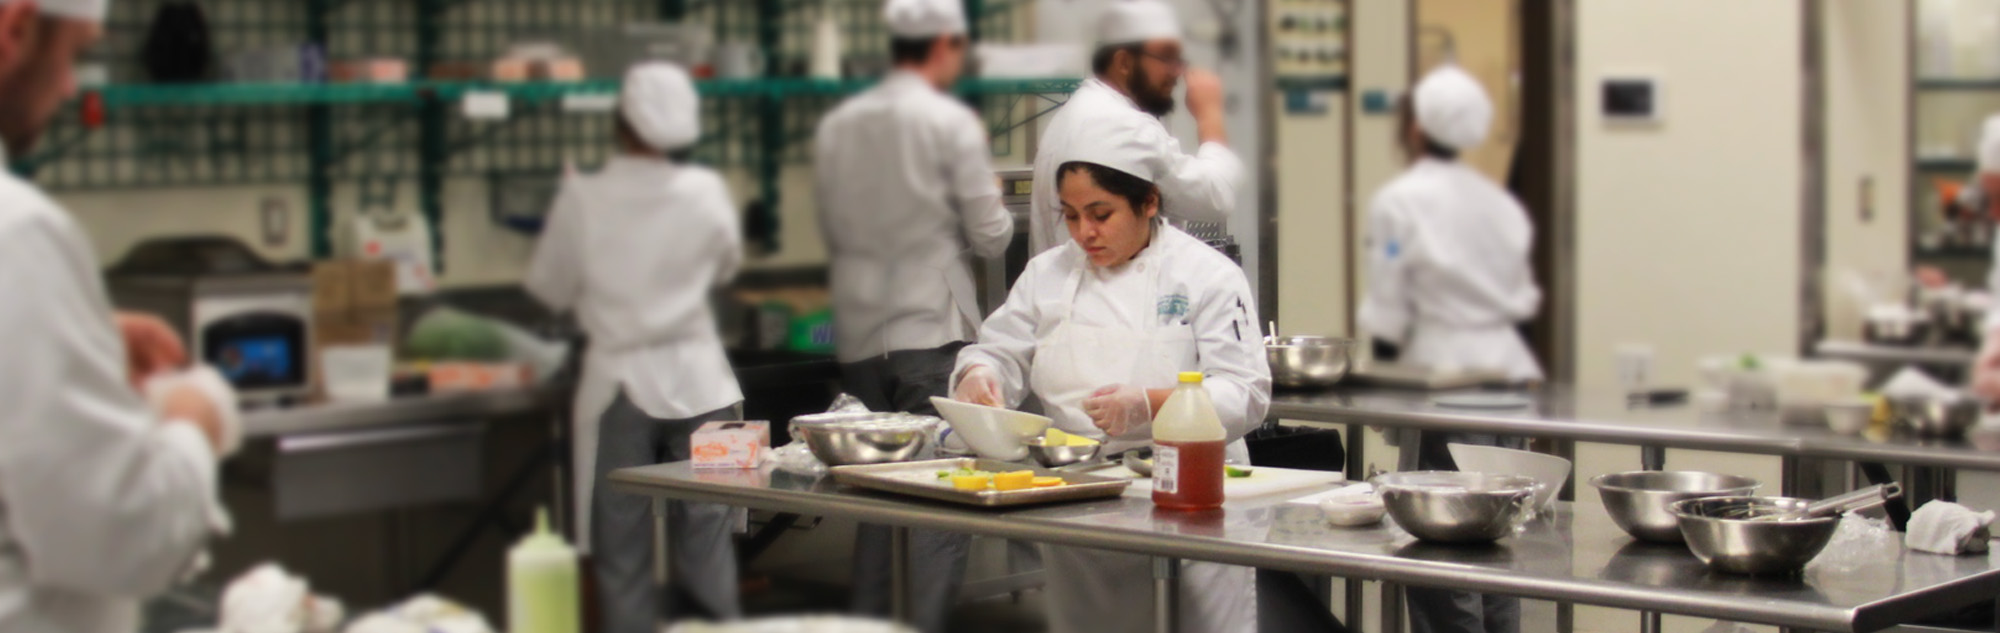 Culinary students prepare entrees in kitchen classroom.